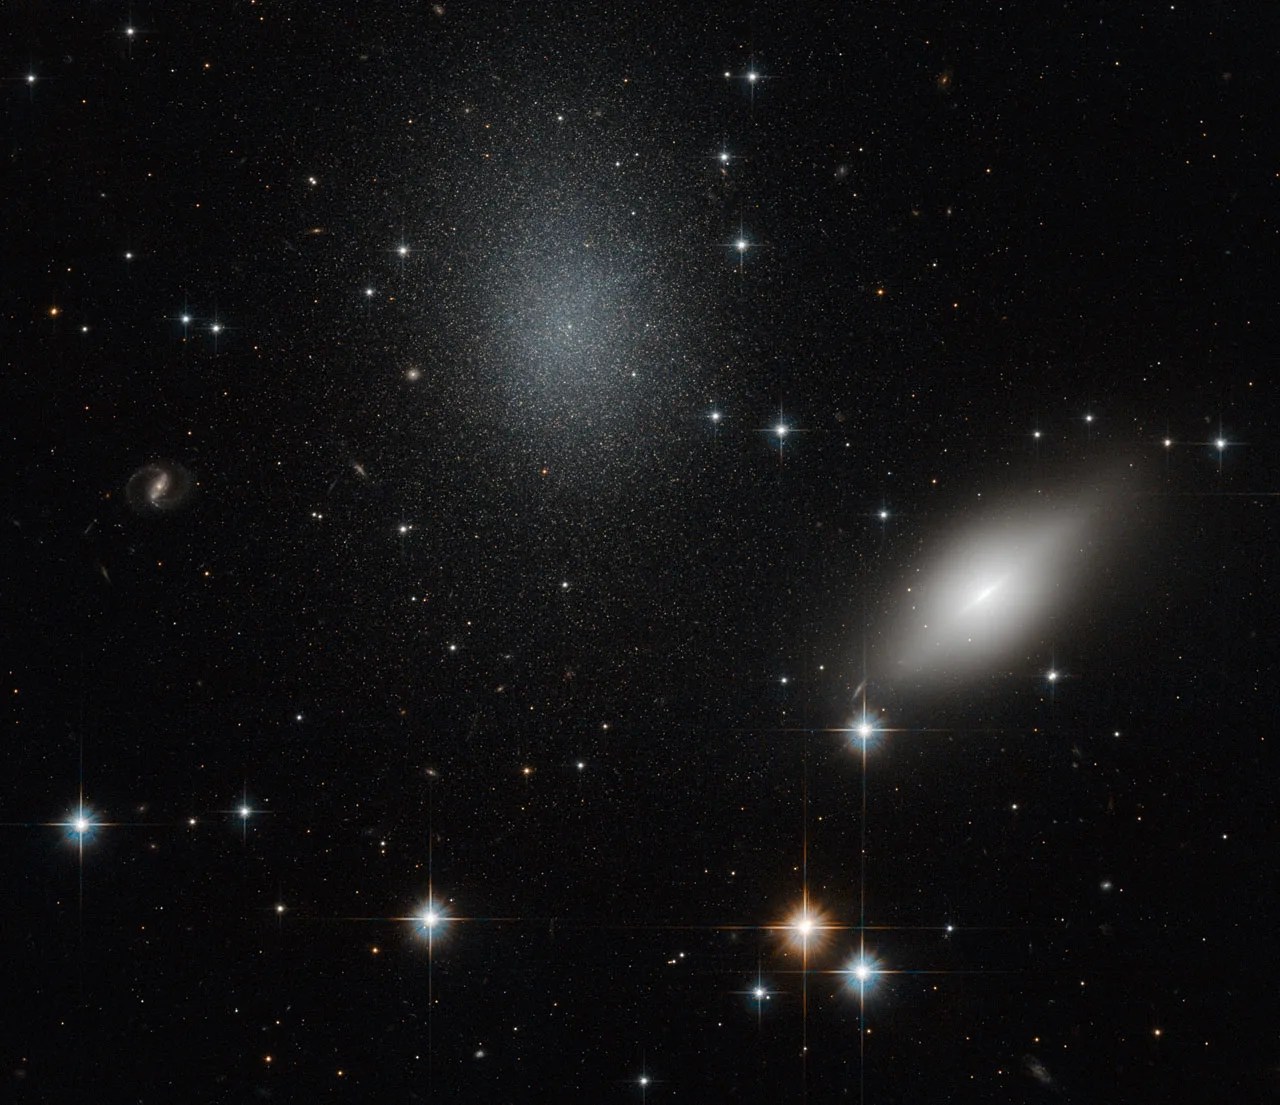 Background stars burn from behind an almond-shaped blurry white galaxy and a diffuse speckled glob of stars